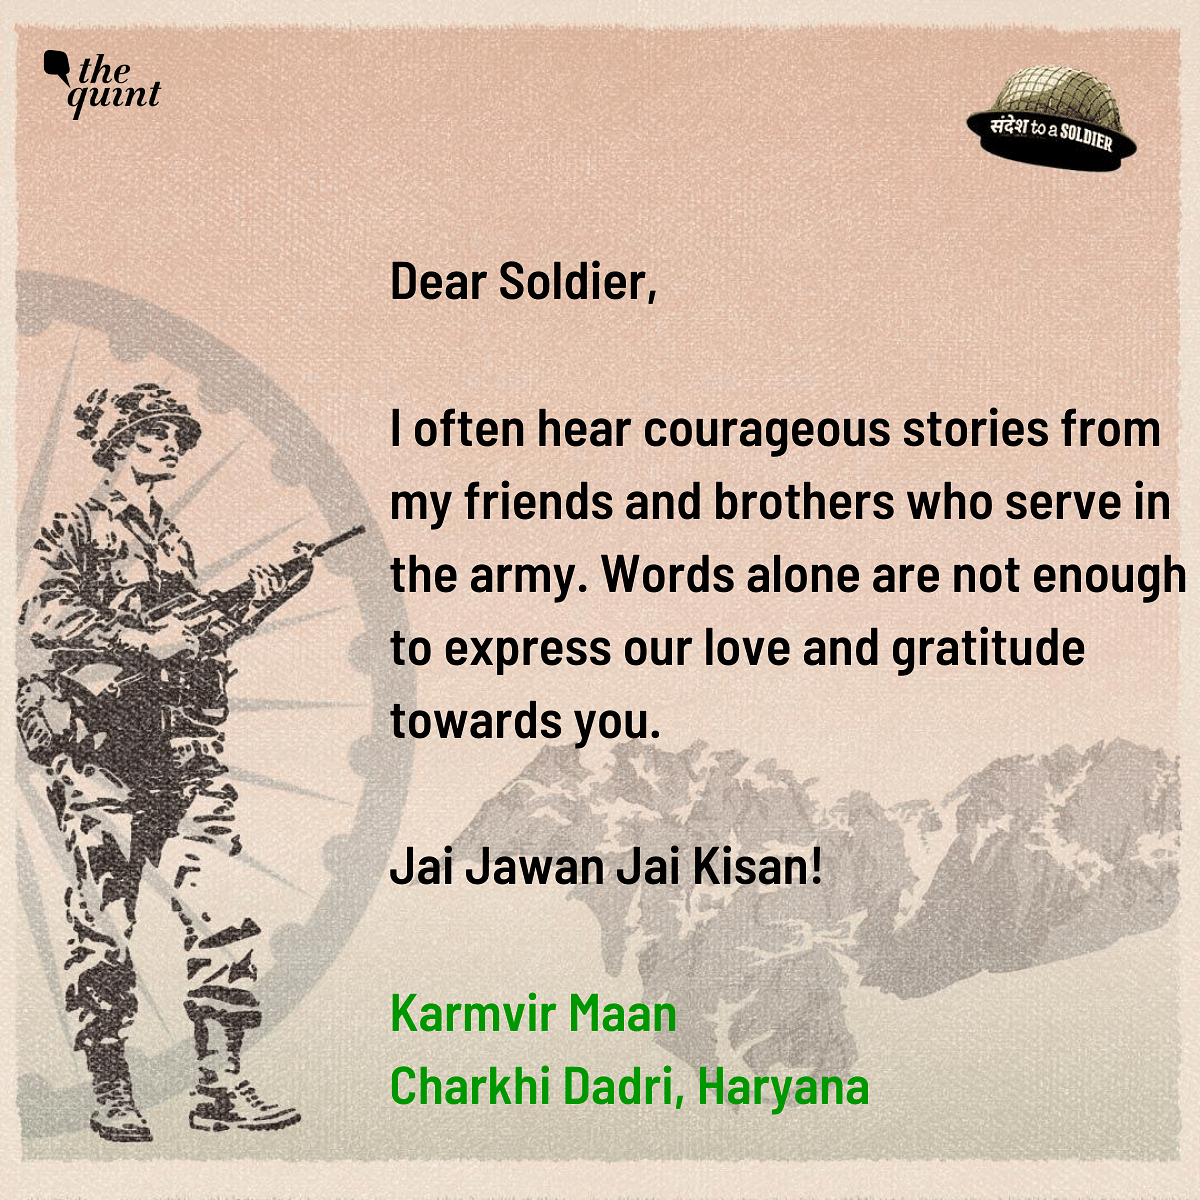 Citizens from India pen down their sandesh to soldiers, thanking them for their selflessness and courage.